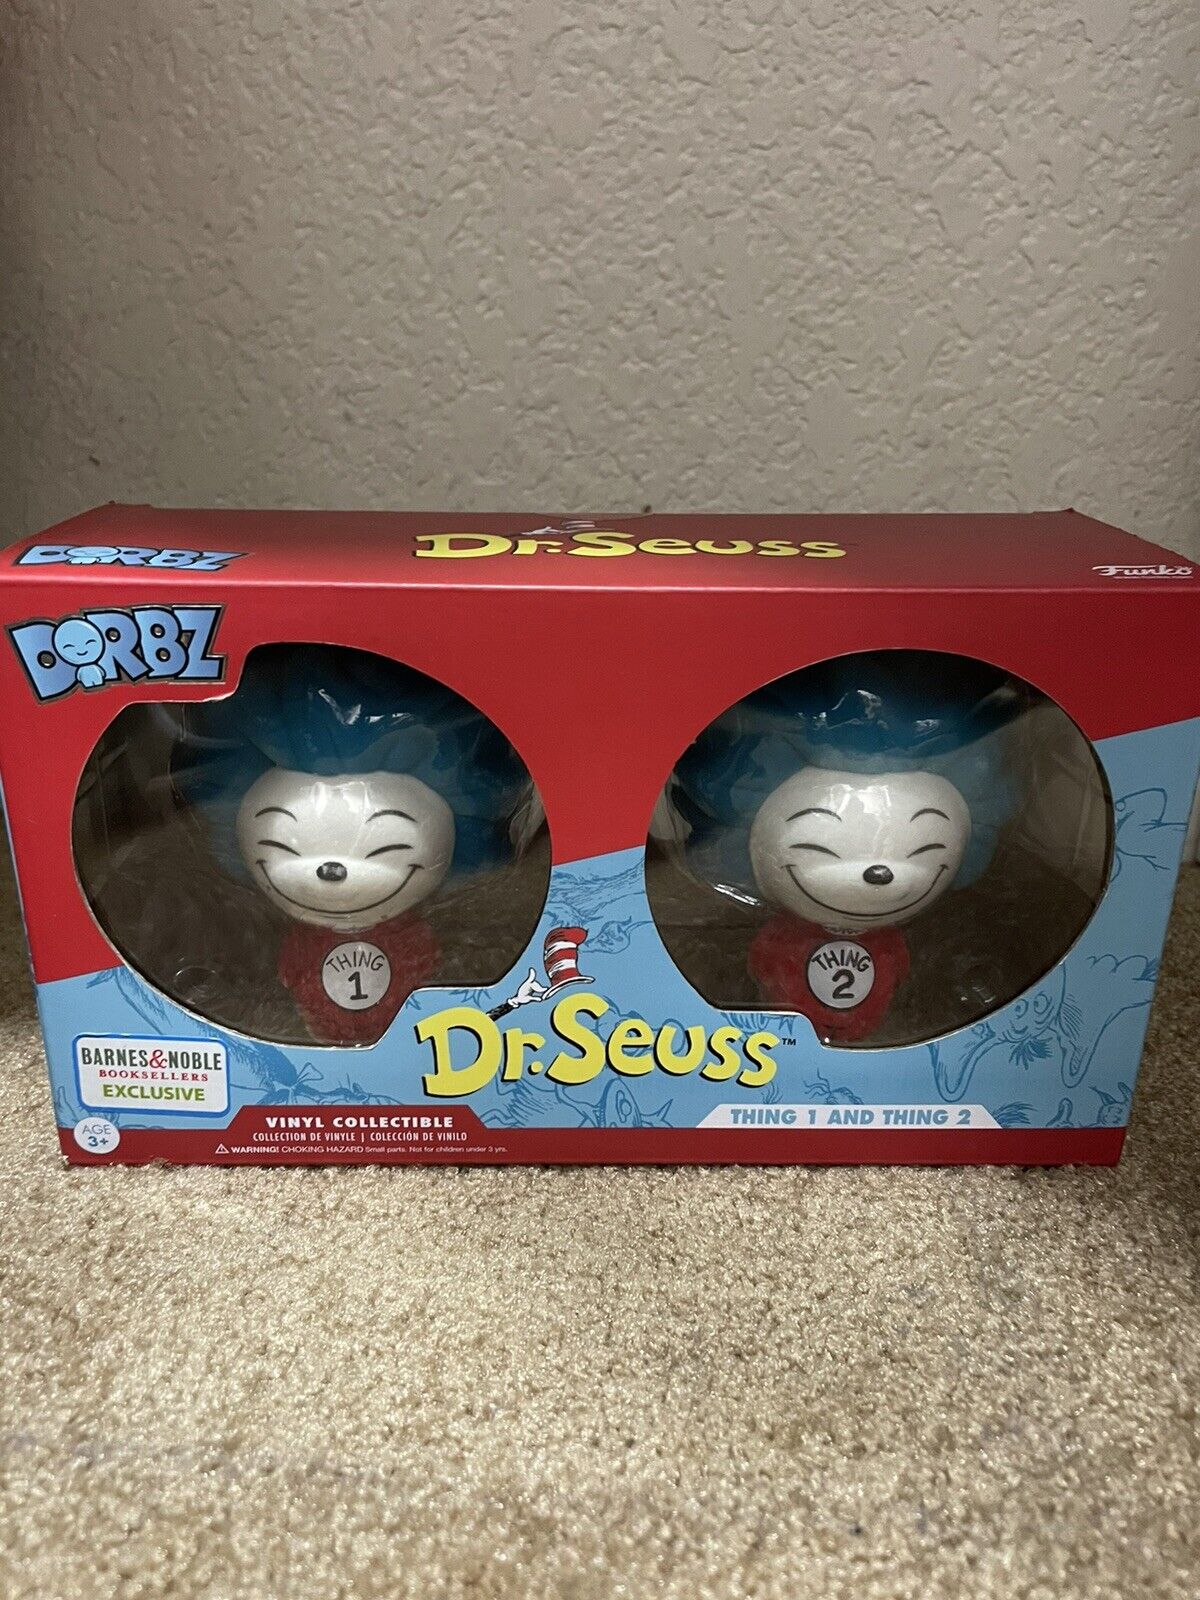 Funko Dorbz Dr Seuss Thing 1 & Thing 2 Flocked Barnes & Noble Exclusive